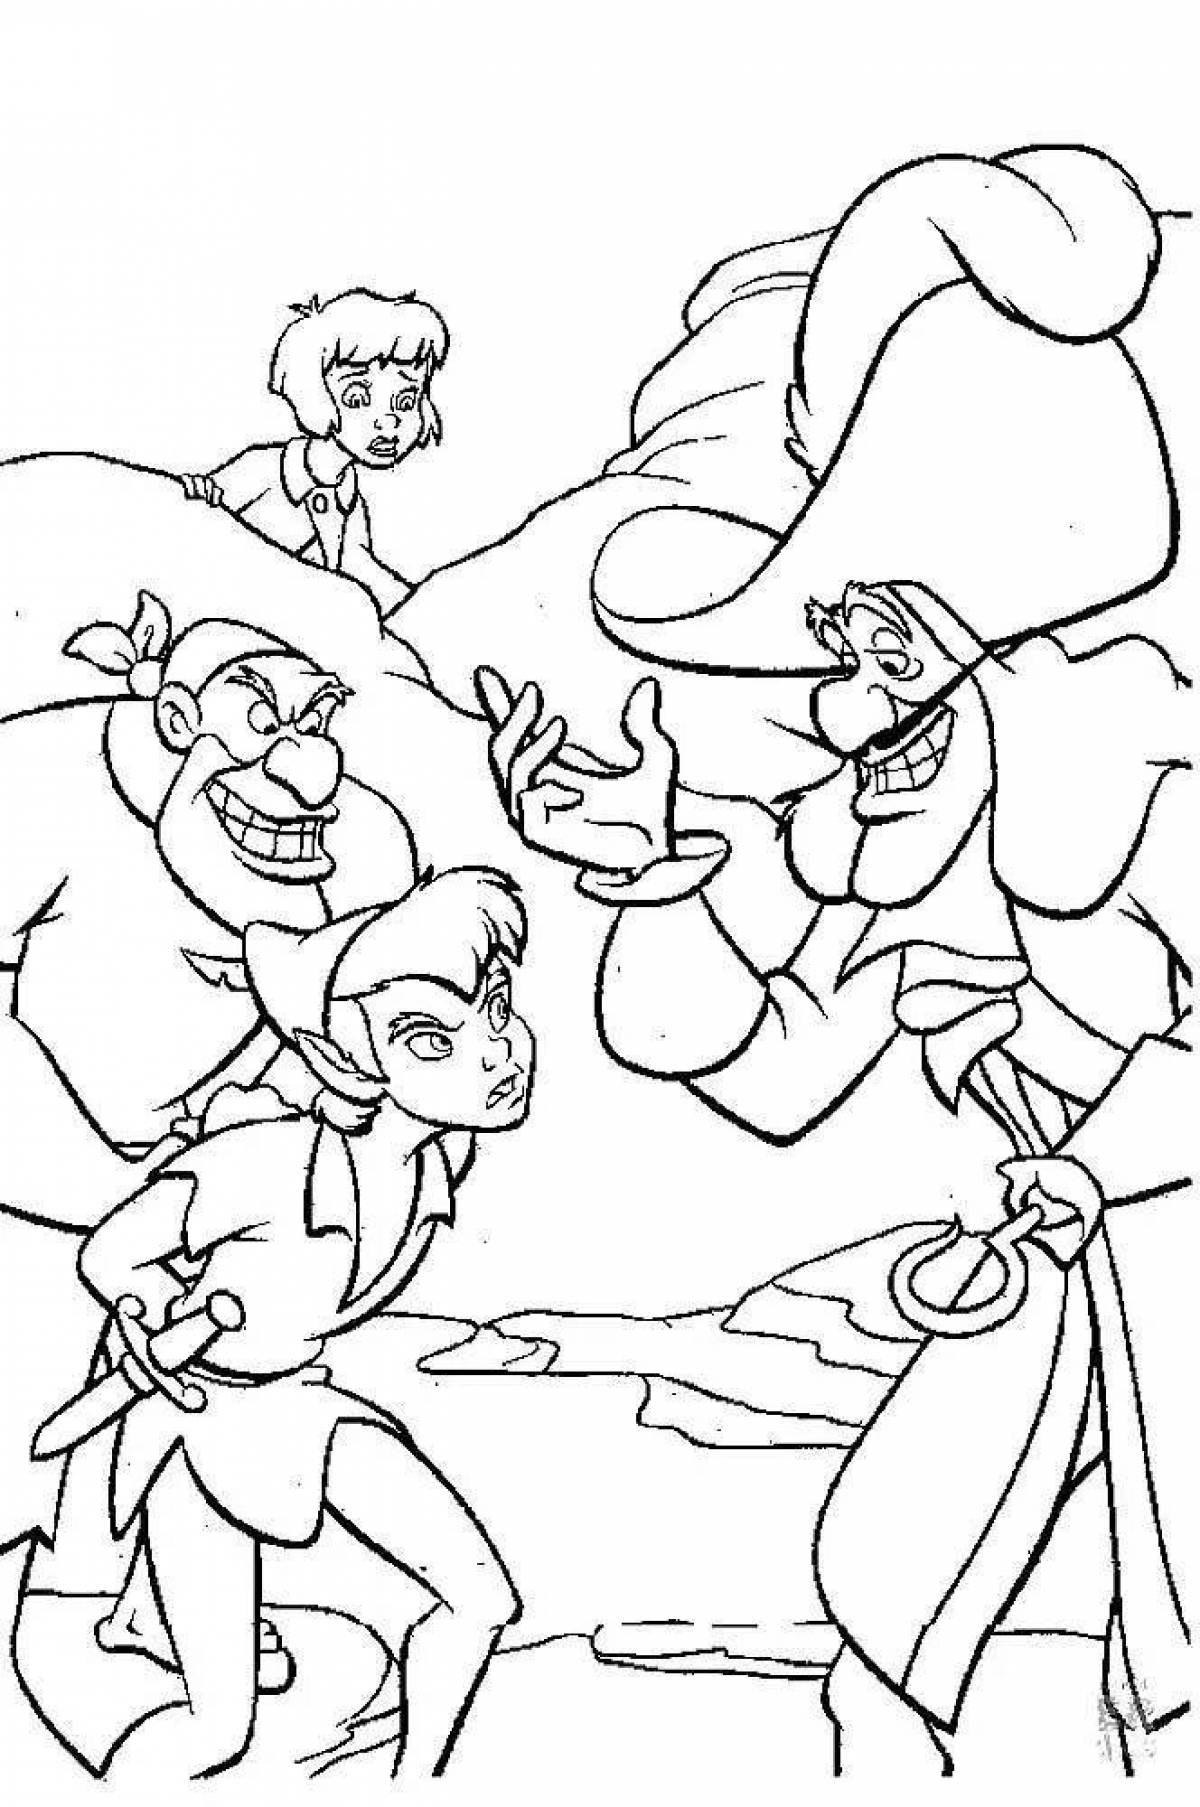 Peter pan fairy tale coloring page